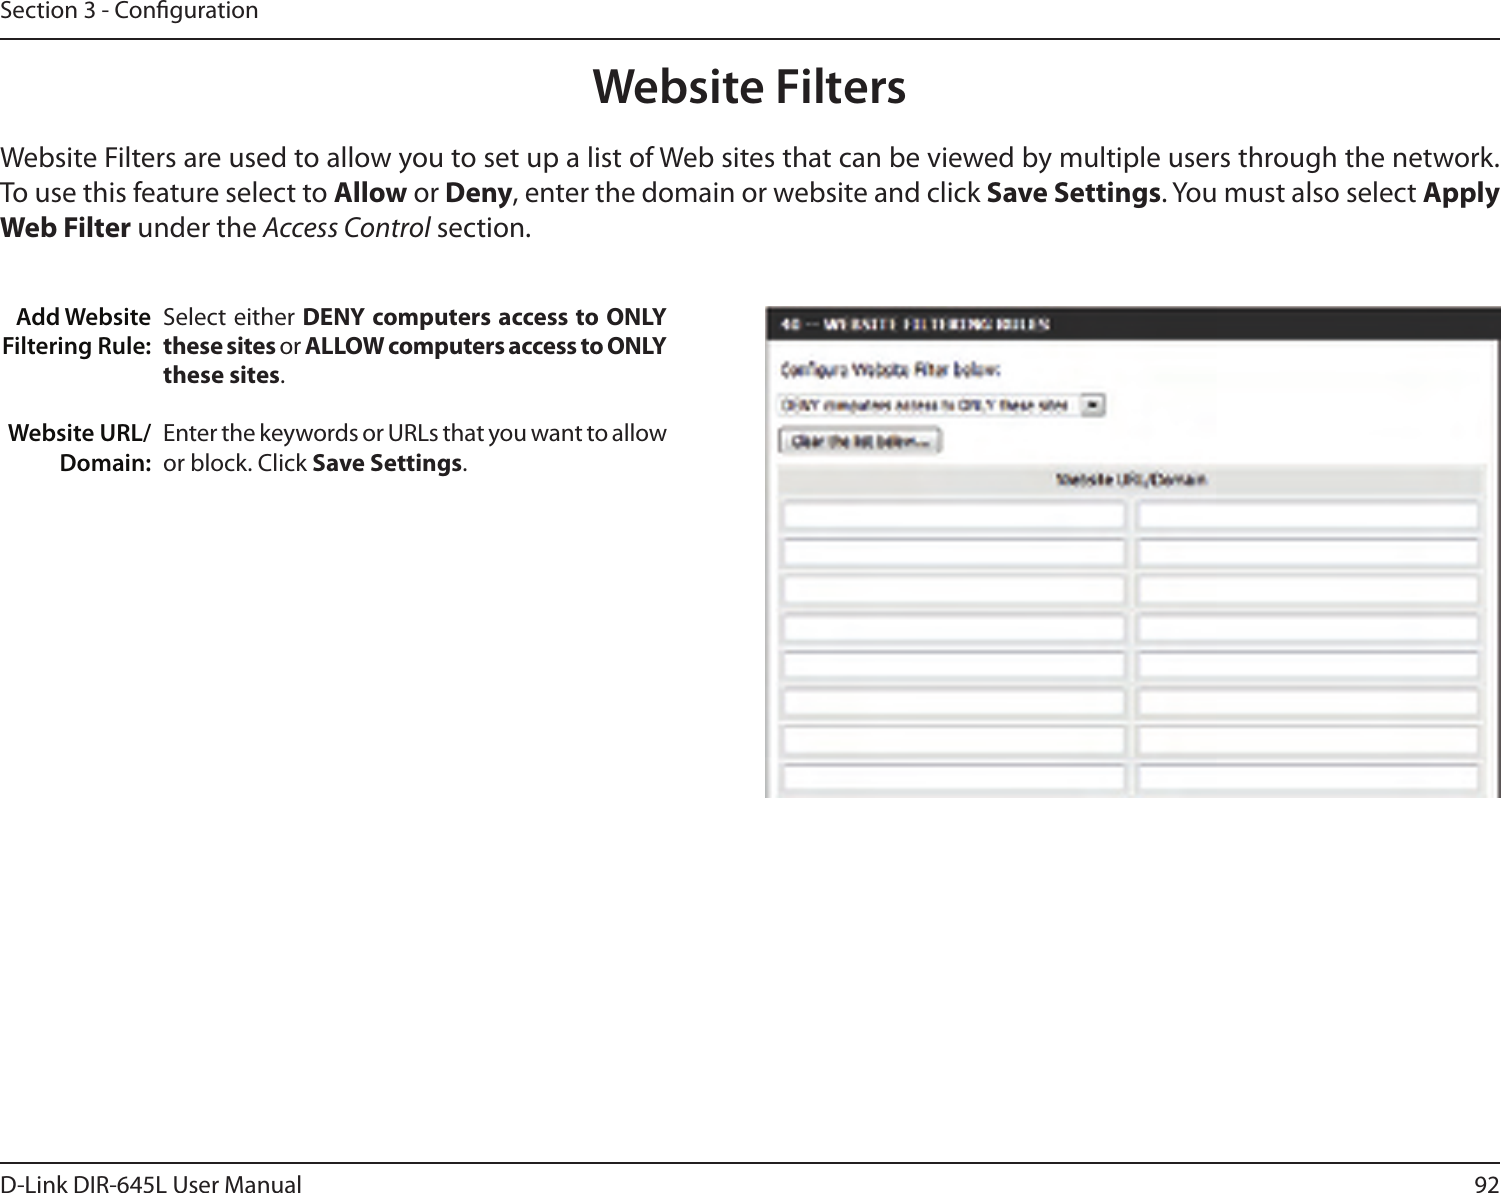 92D-Link DIR-645L User ManualSection 3 - CongurationAdd Website Filtering Rule:Website URL/Domain:Website FiltersSelect either DENY computers access to ONLY these sites or ALLOW computers access to ONLY these sites.Enter the keywords or URLs that you want to allow or block. Click Save Settings.Website Filters are used to allow you to set up a list of Web sites that can be viewed by multiple users through the network. To use this feature select to Allow or Deny, enter the domain or website and click Save Settings. You must also select Apply Web Filter under the Access Control section.